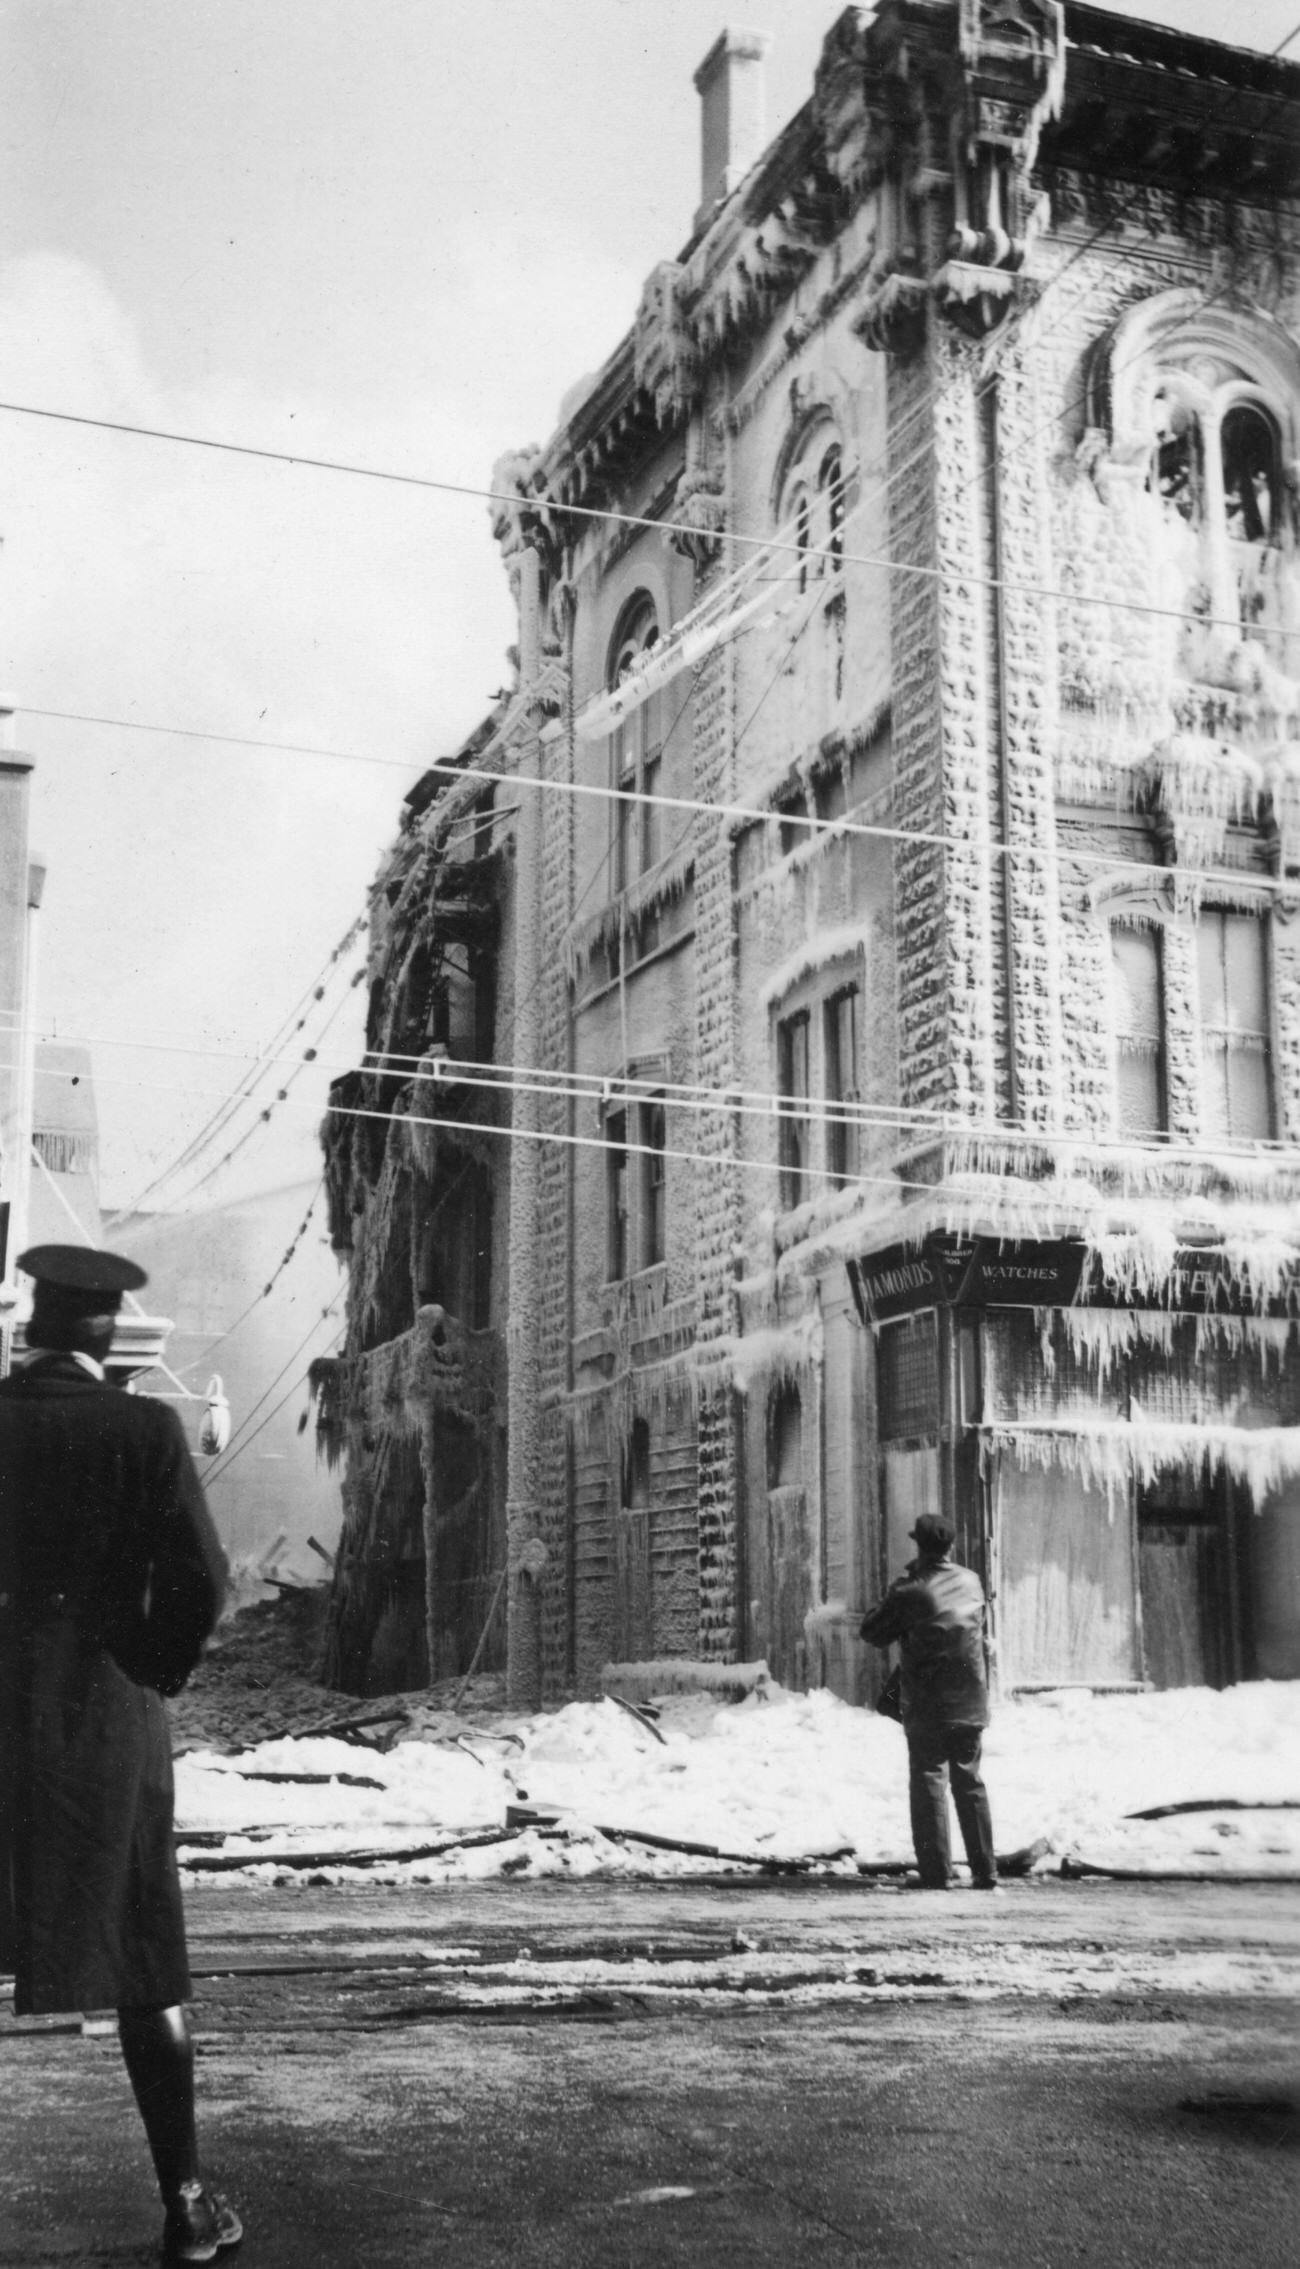 Oddfellows Hall building fire in 1936, with firefighter casualties, 1936.